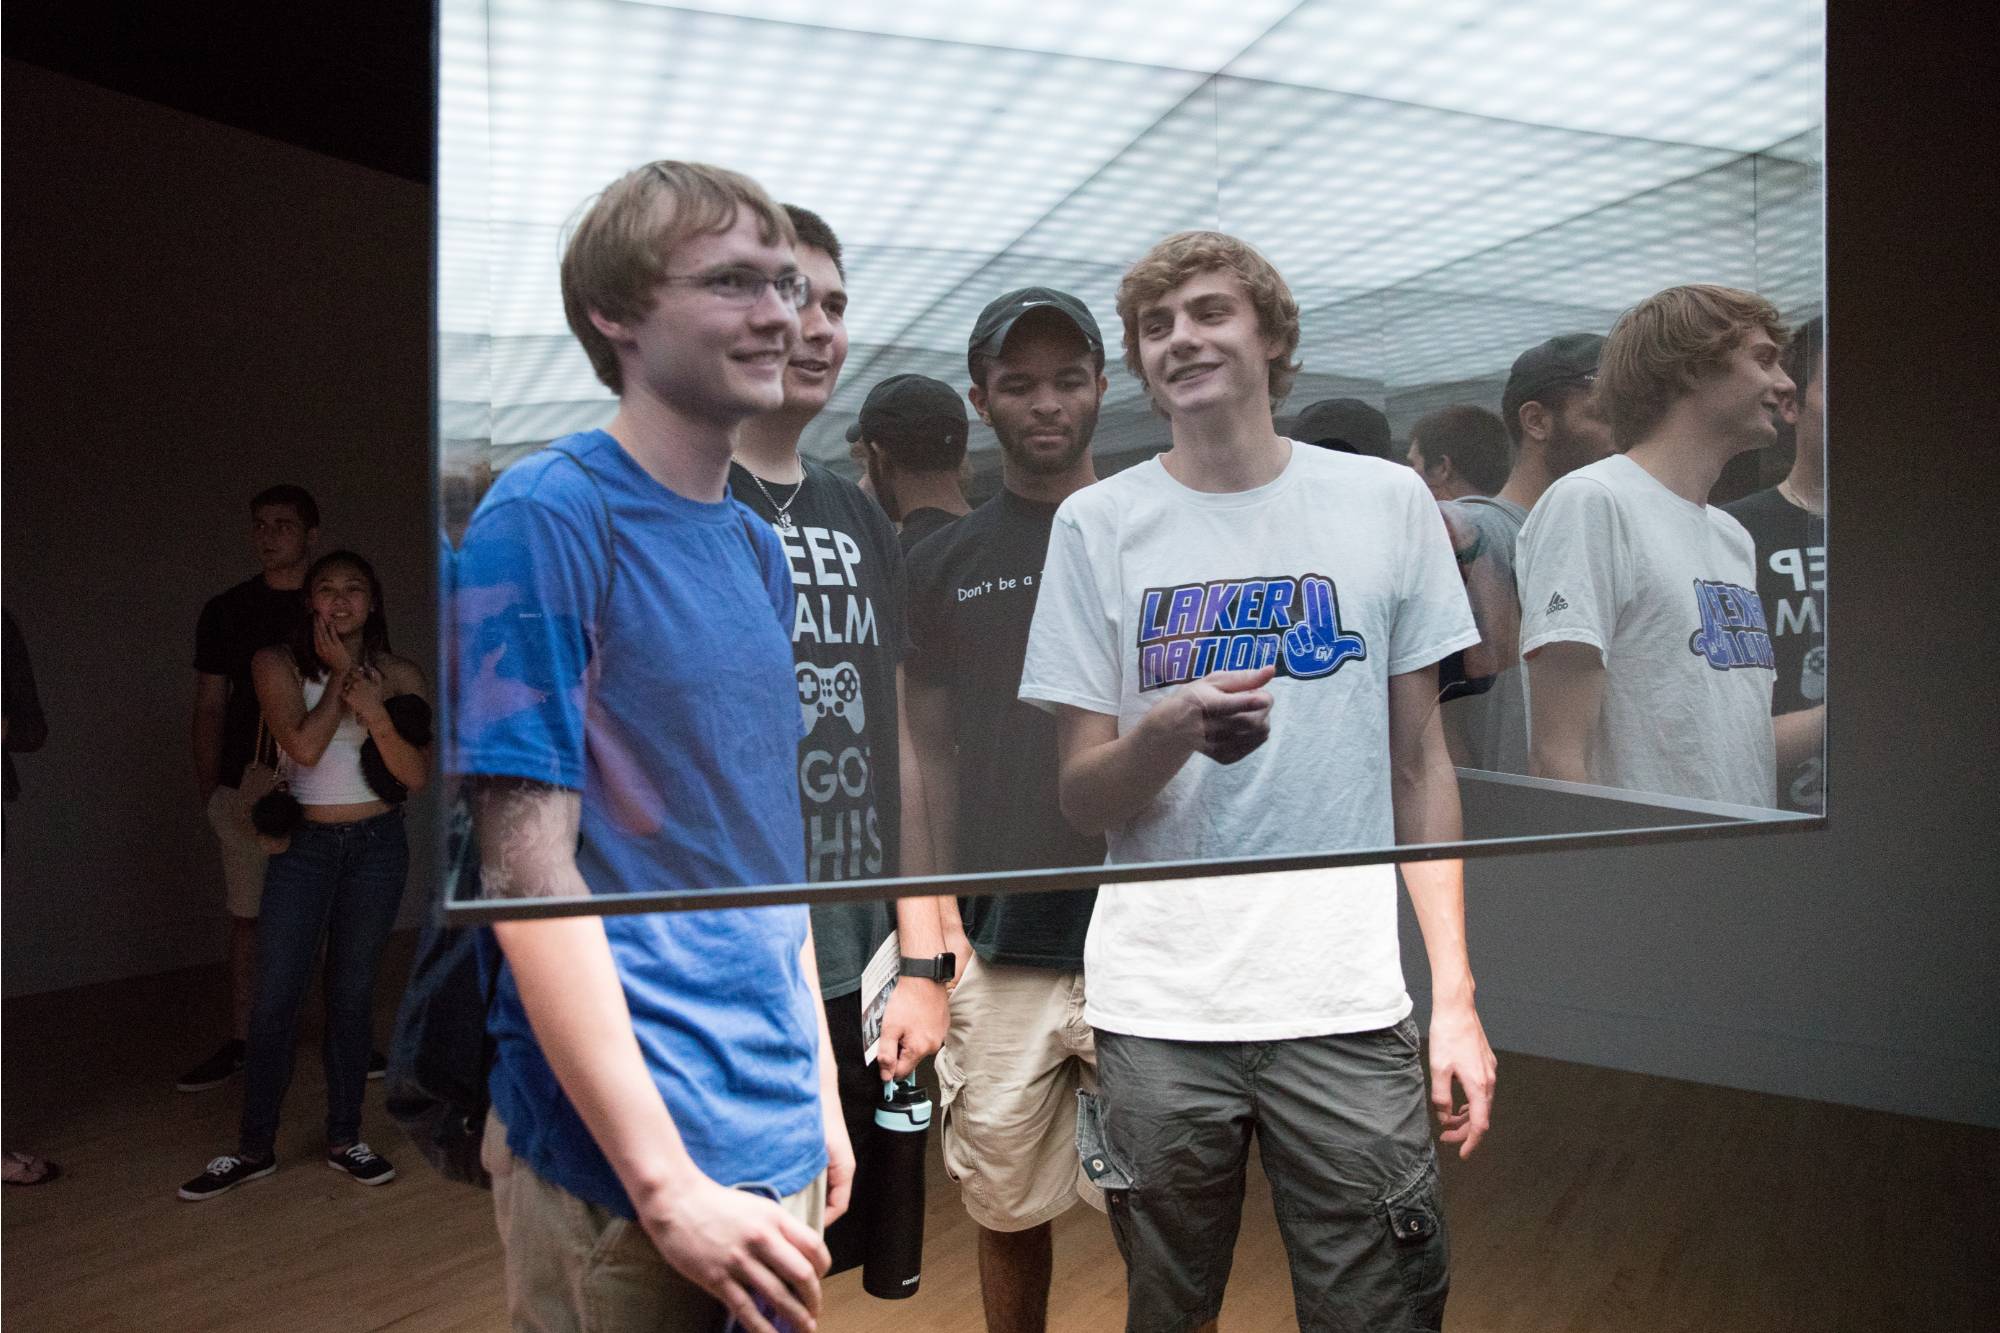 Students within an artwork made of plexiglass